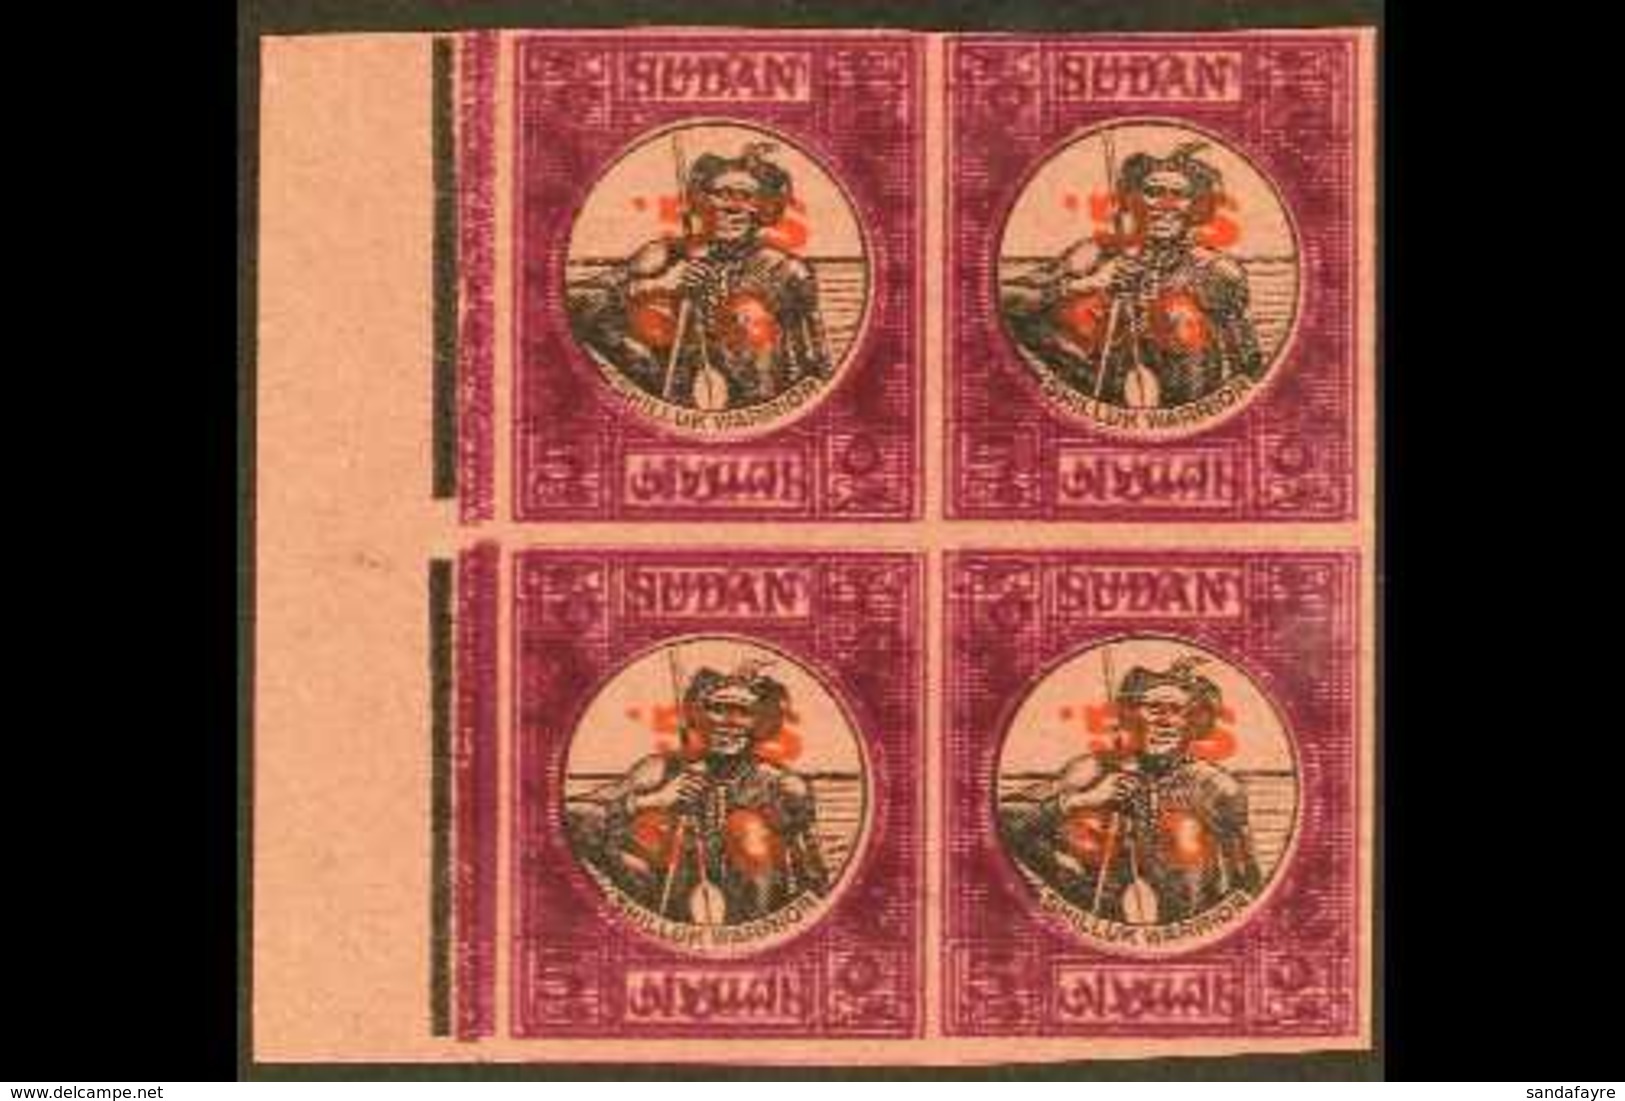 OFFICIALS 1951-61 5m Black & Purple Marginal IMPERF PLATE PROOF BLOCK Of 4 With purple Colour PRINTED DOUBLE ONE INVERTE - Sudan (...-1951)